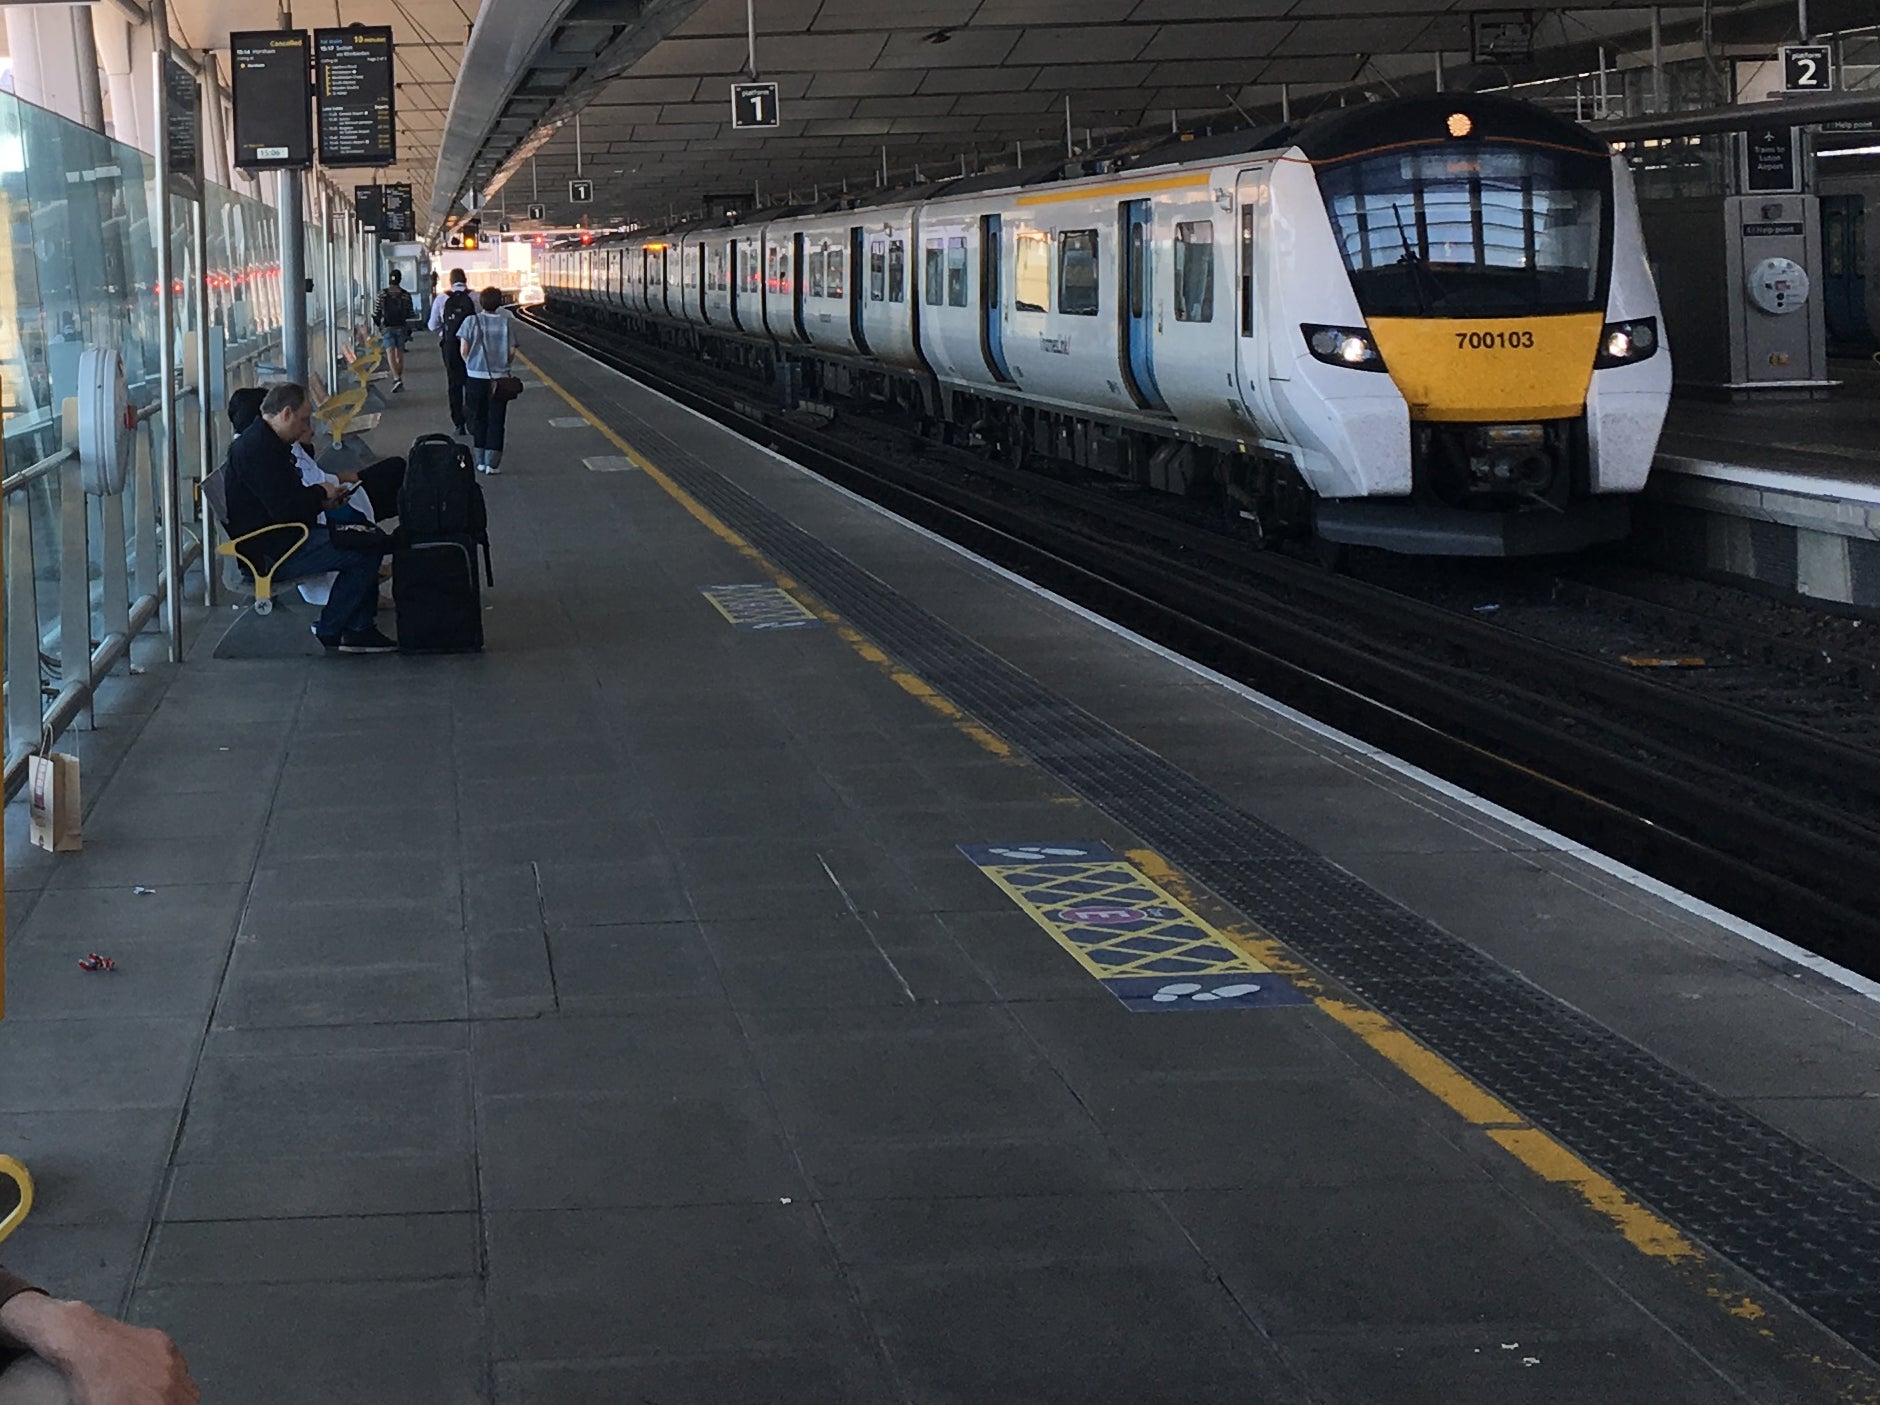 Thameslink has cut some of its services